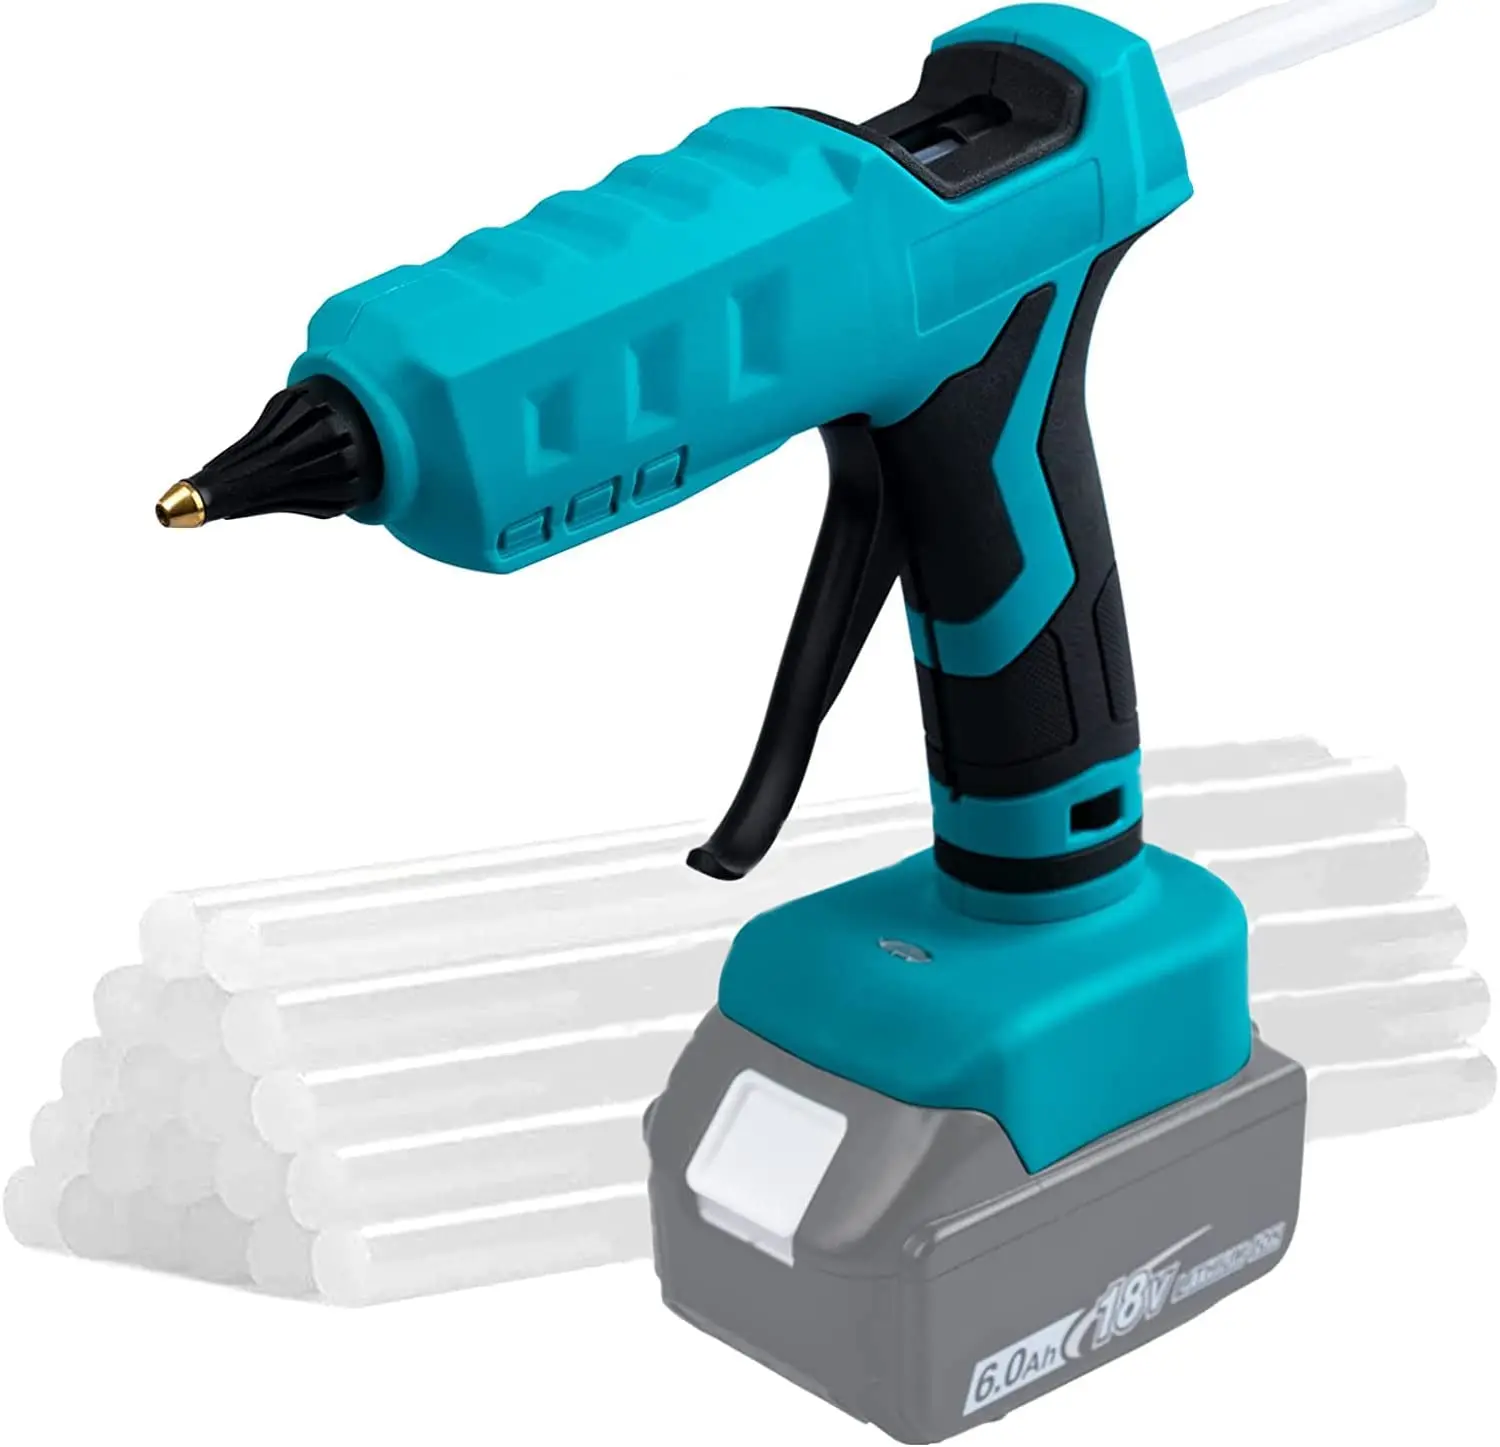 100W Cordless Hot Glue Gun for Makita 18V BL1830 BL1840 LXT Battery use 11mm Glue Sticks DIY Electric Heat Repair Tool Christmas 1m 60mm to 180mm 18650 battery insulation gasket barley paper li ion pack cell insulating glue patch electrode insulated pads